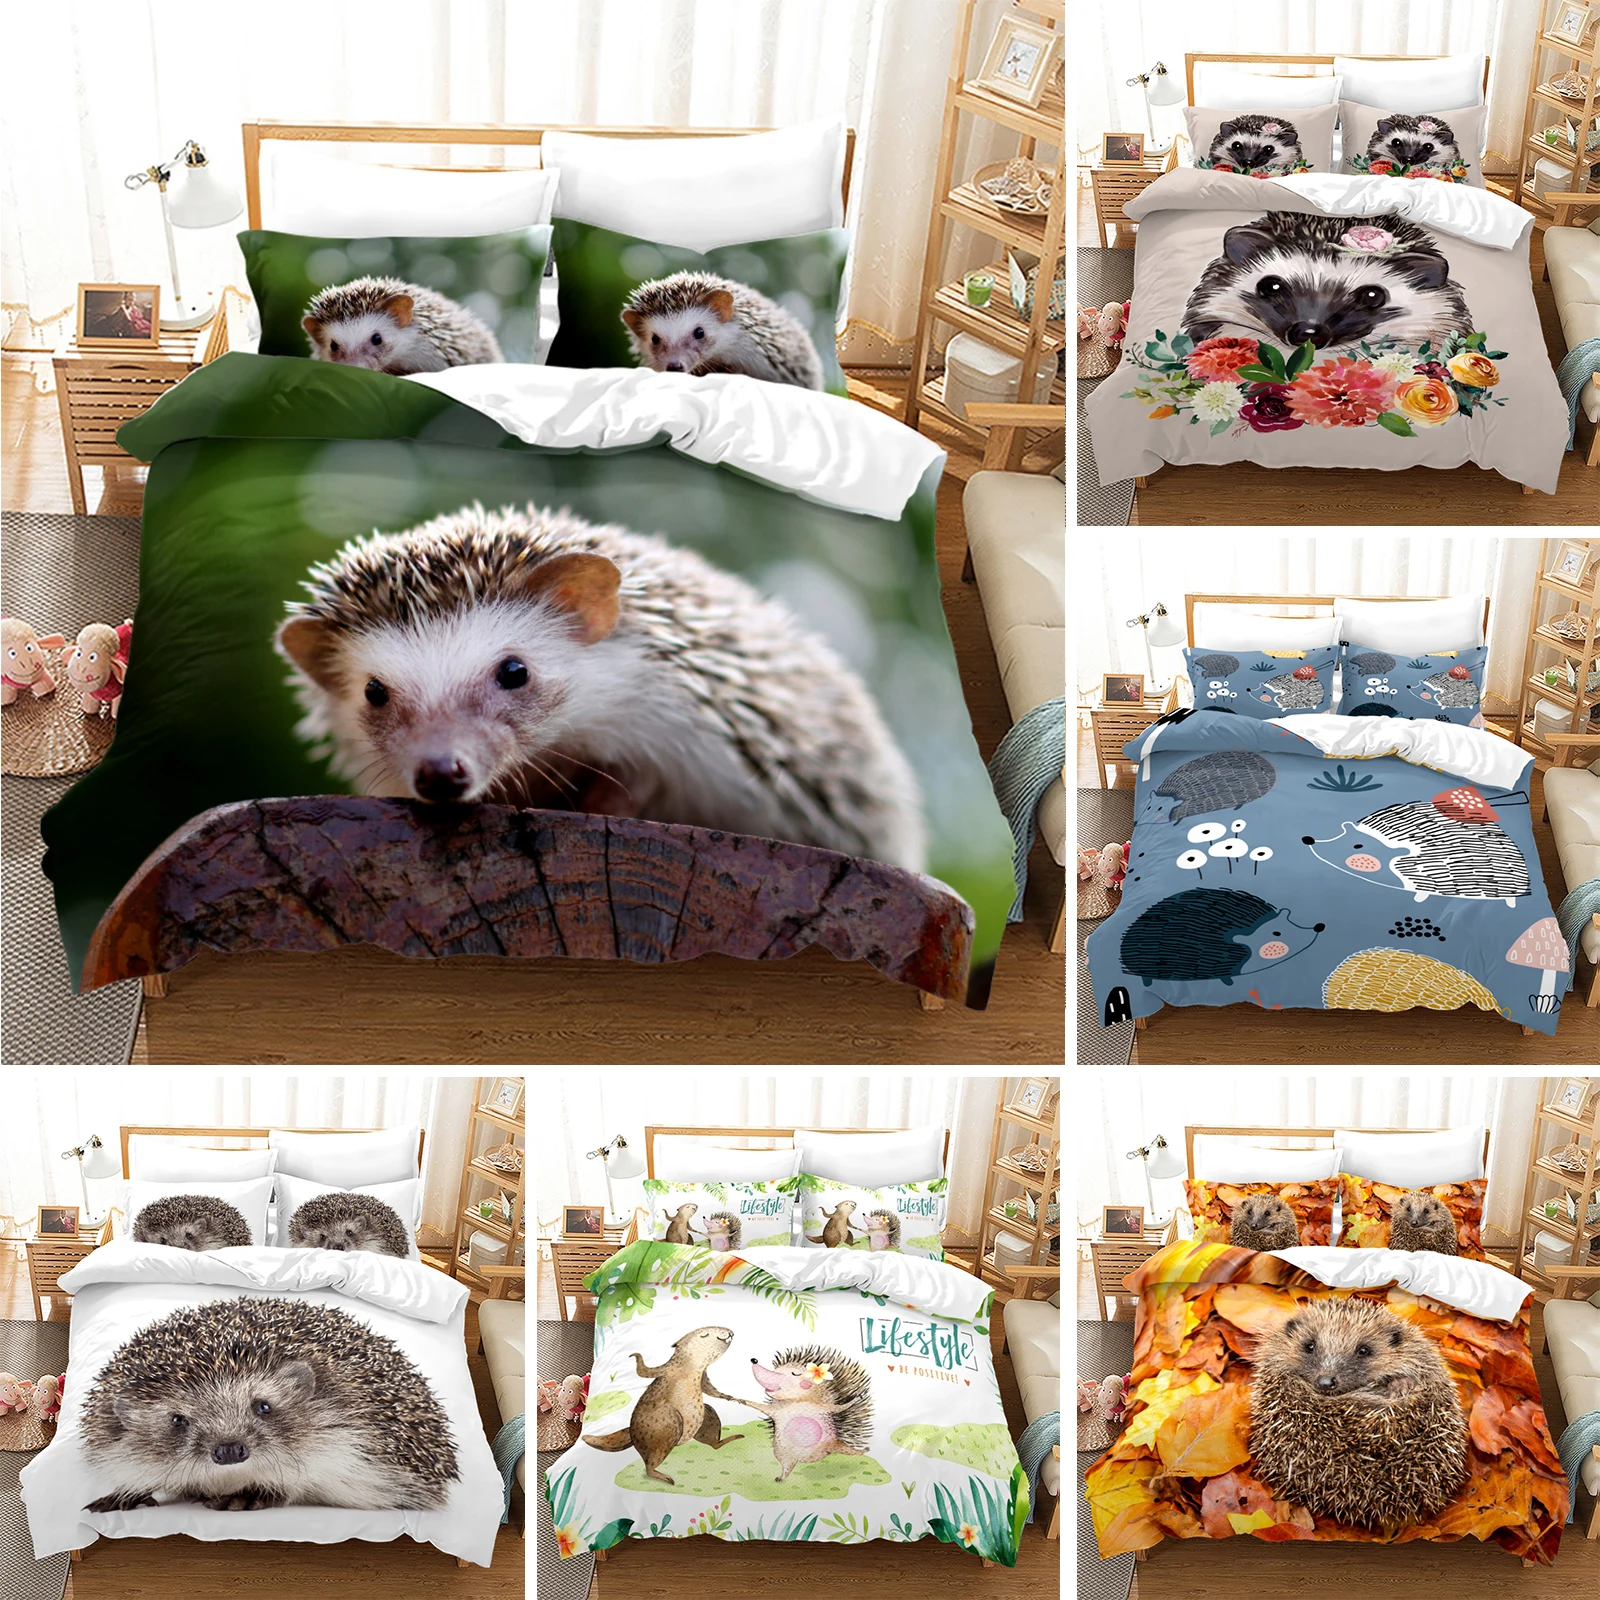 

Hedgehog Duvet Cover King/Queen Size,Cute Brown Hedgehog Pattern Print Quilt Cover for Kids Girls Boy,animal Theme Bedding